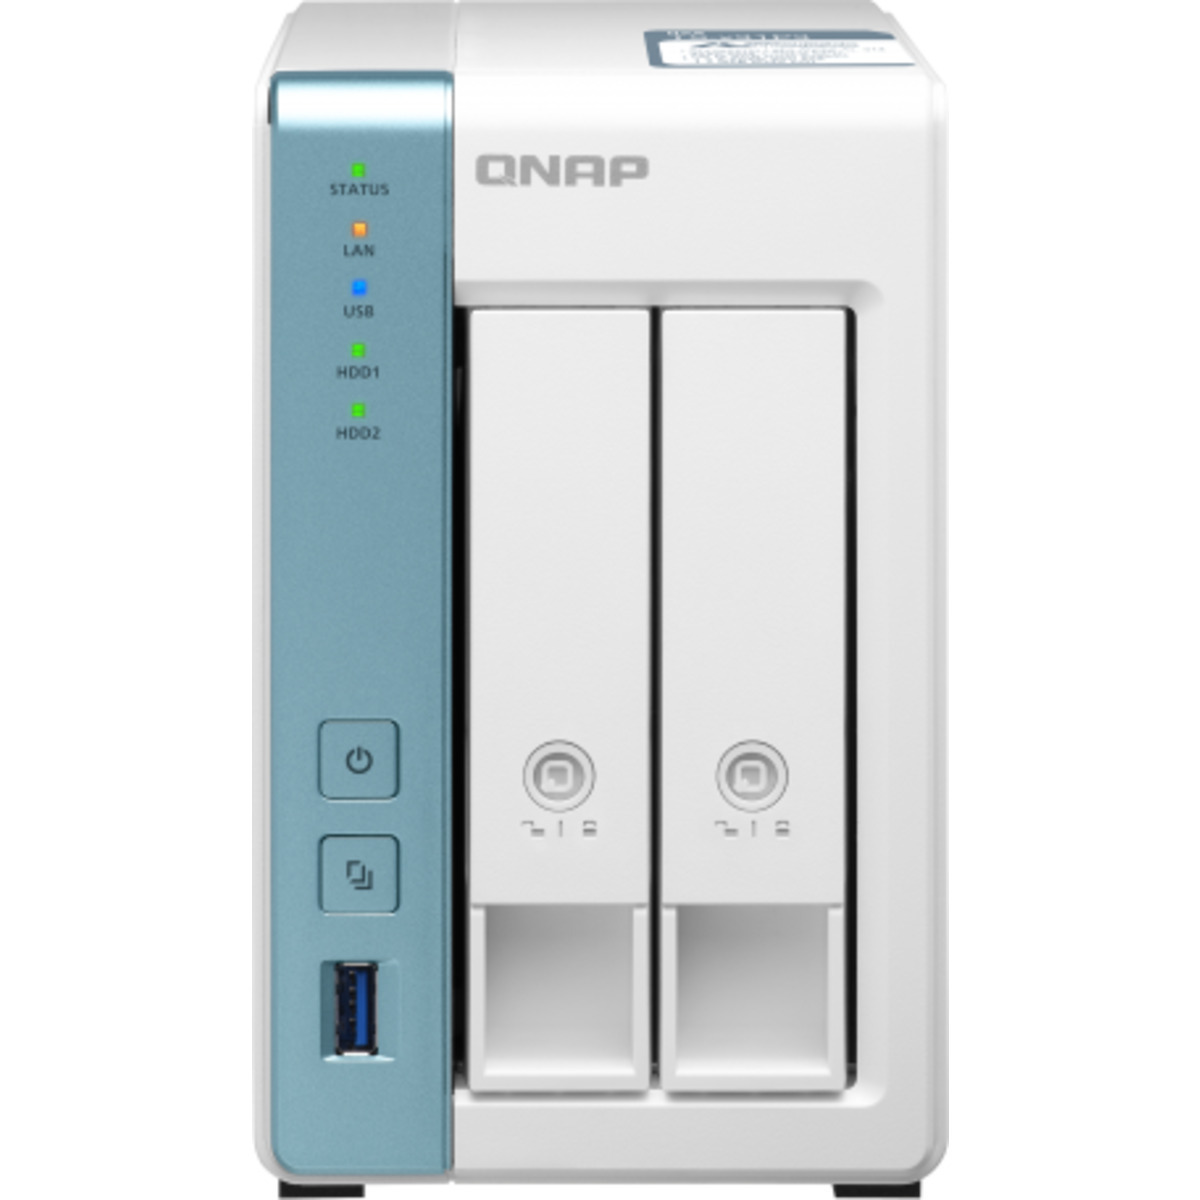 buy QNAP TS-231P3 Desktop NAS - Network Attached Storage Device Burn-In Tested Configurations - FREE RAM UPGRADE - nas headquarters buy network attached storage server device das new raid-5 free shipping usa christmas new year holiday sale TS-231P3